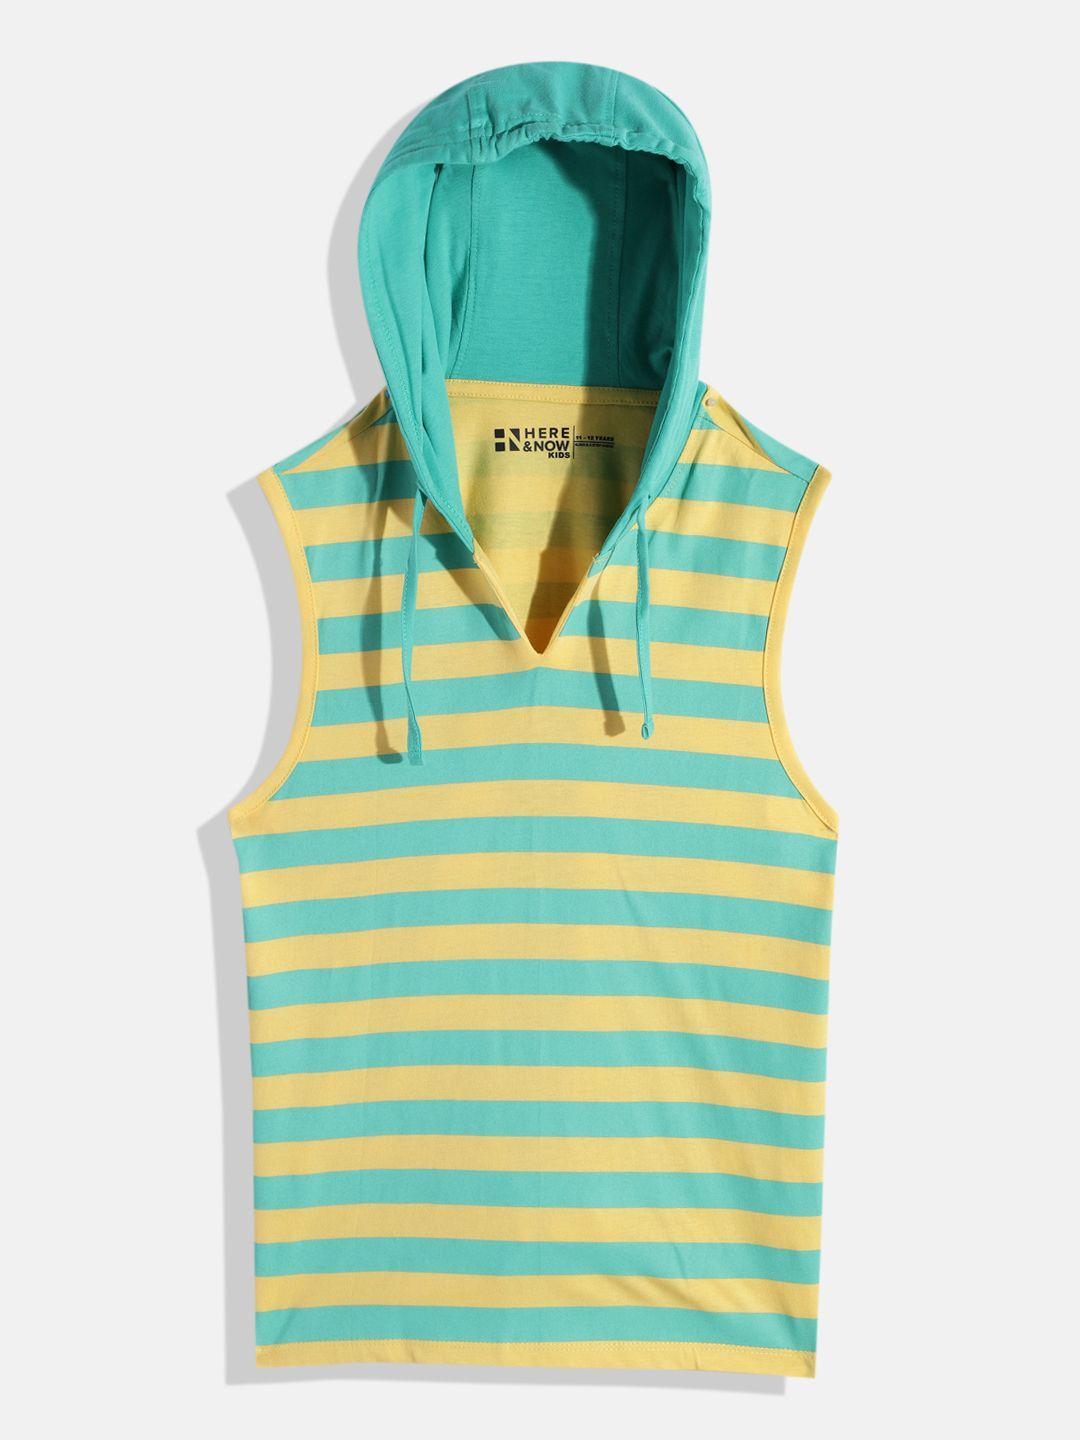 here&now boys striped hooded sleeveless pure cotton t-shirt